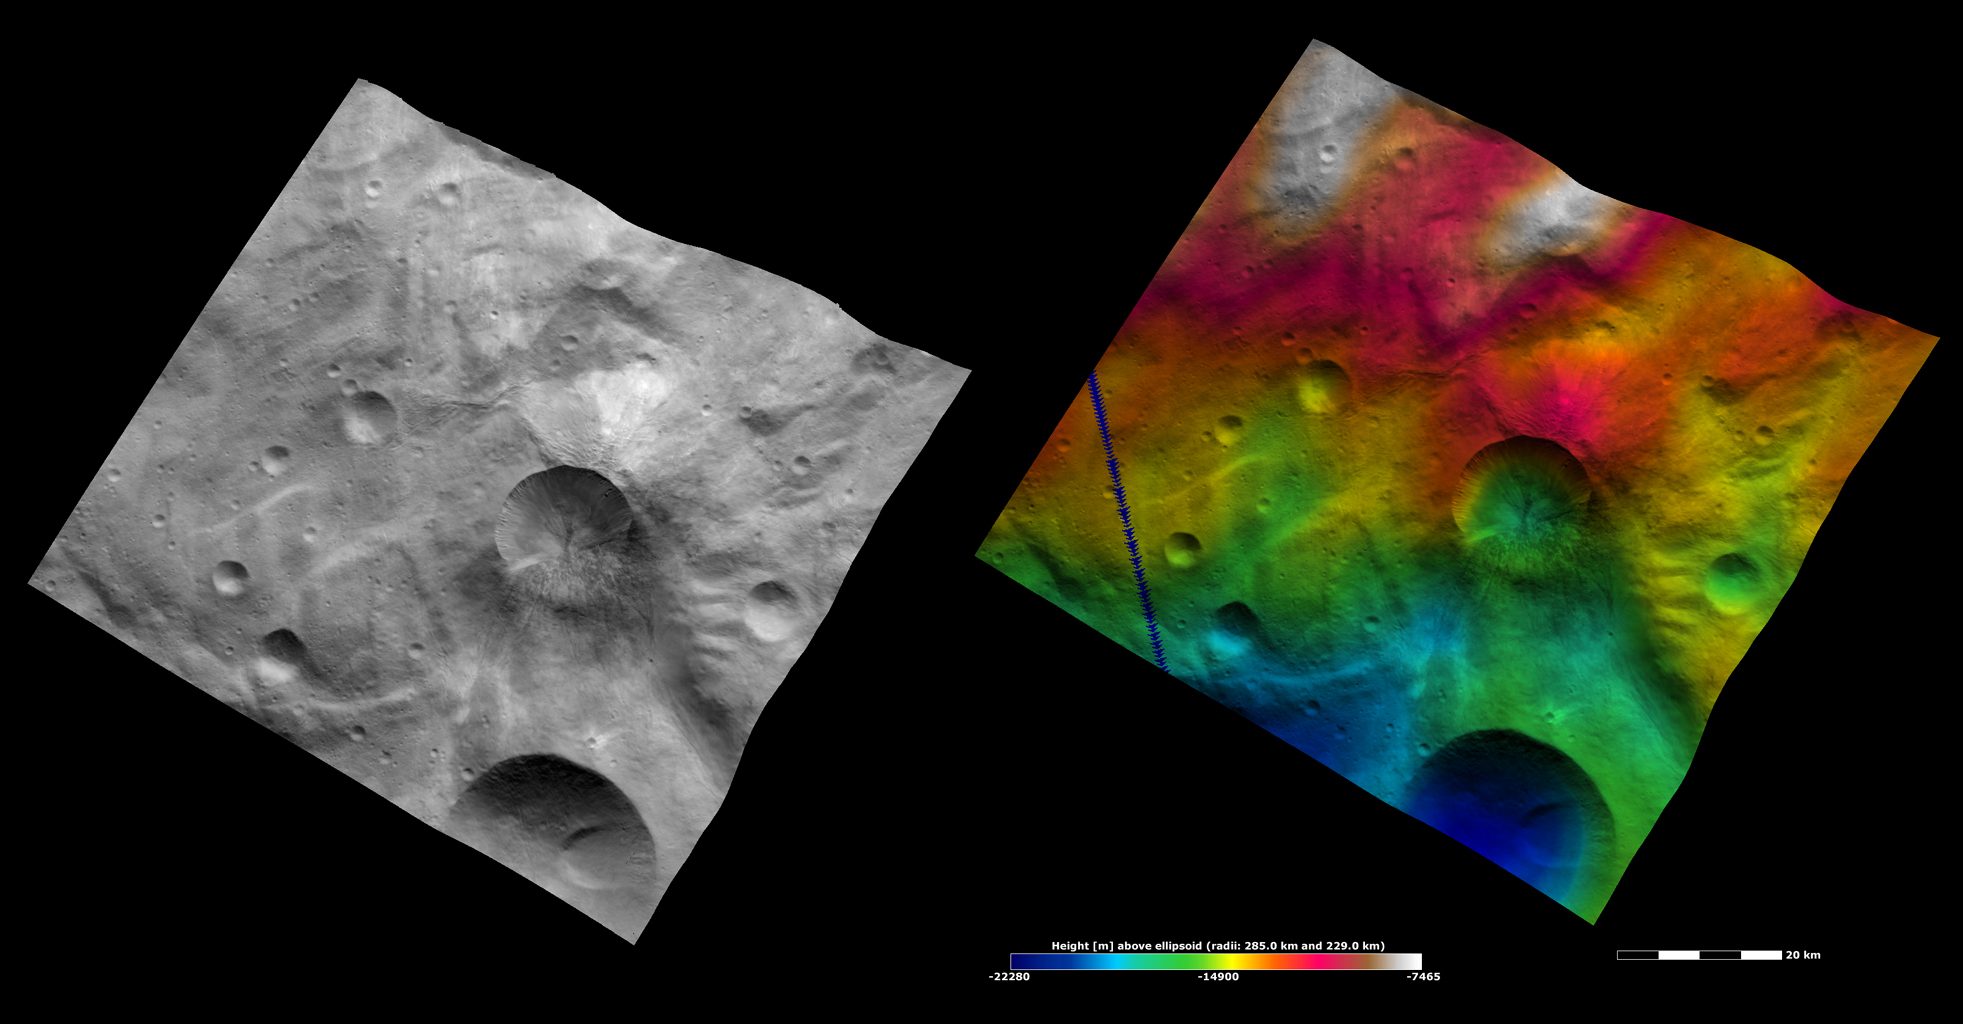 Apparent Brightness and Topography Images of Antonia Crater